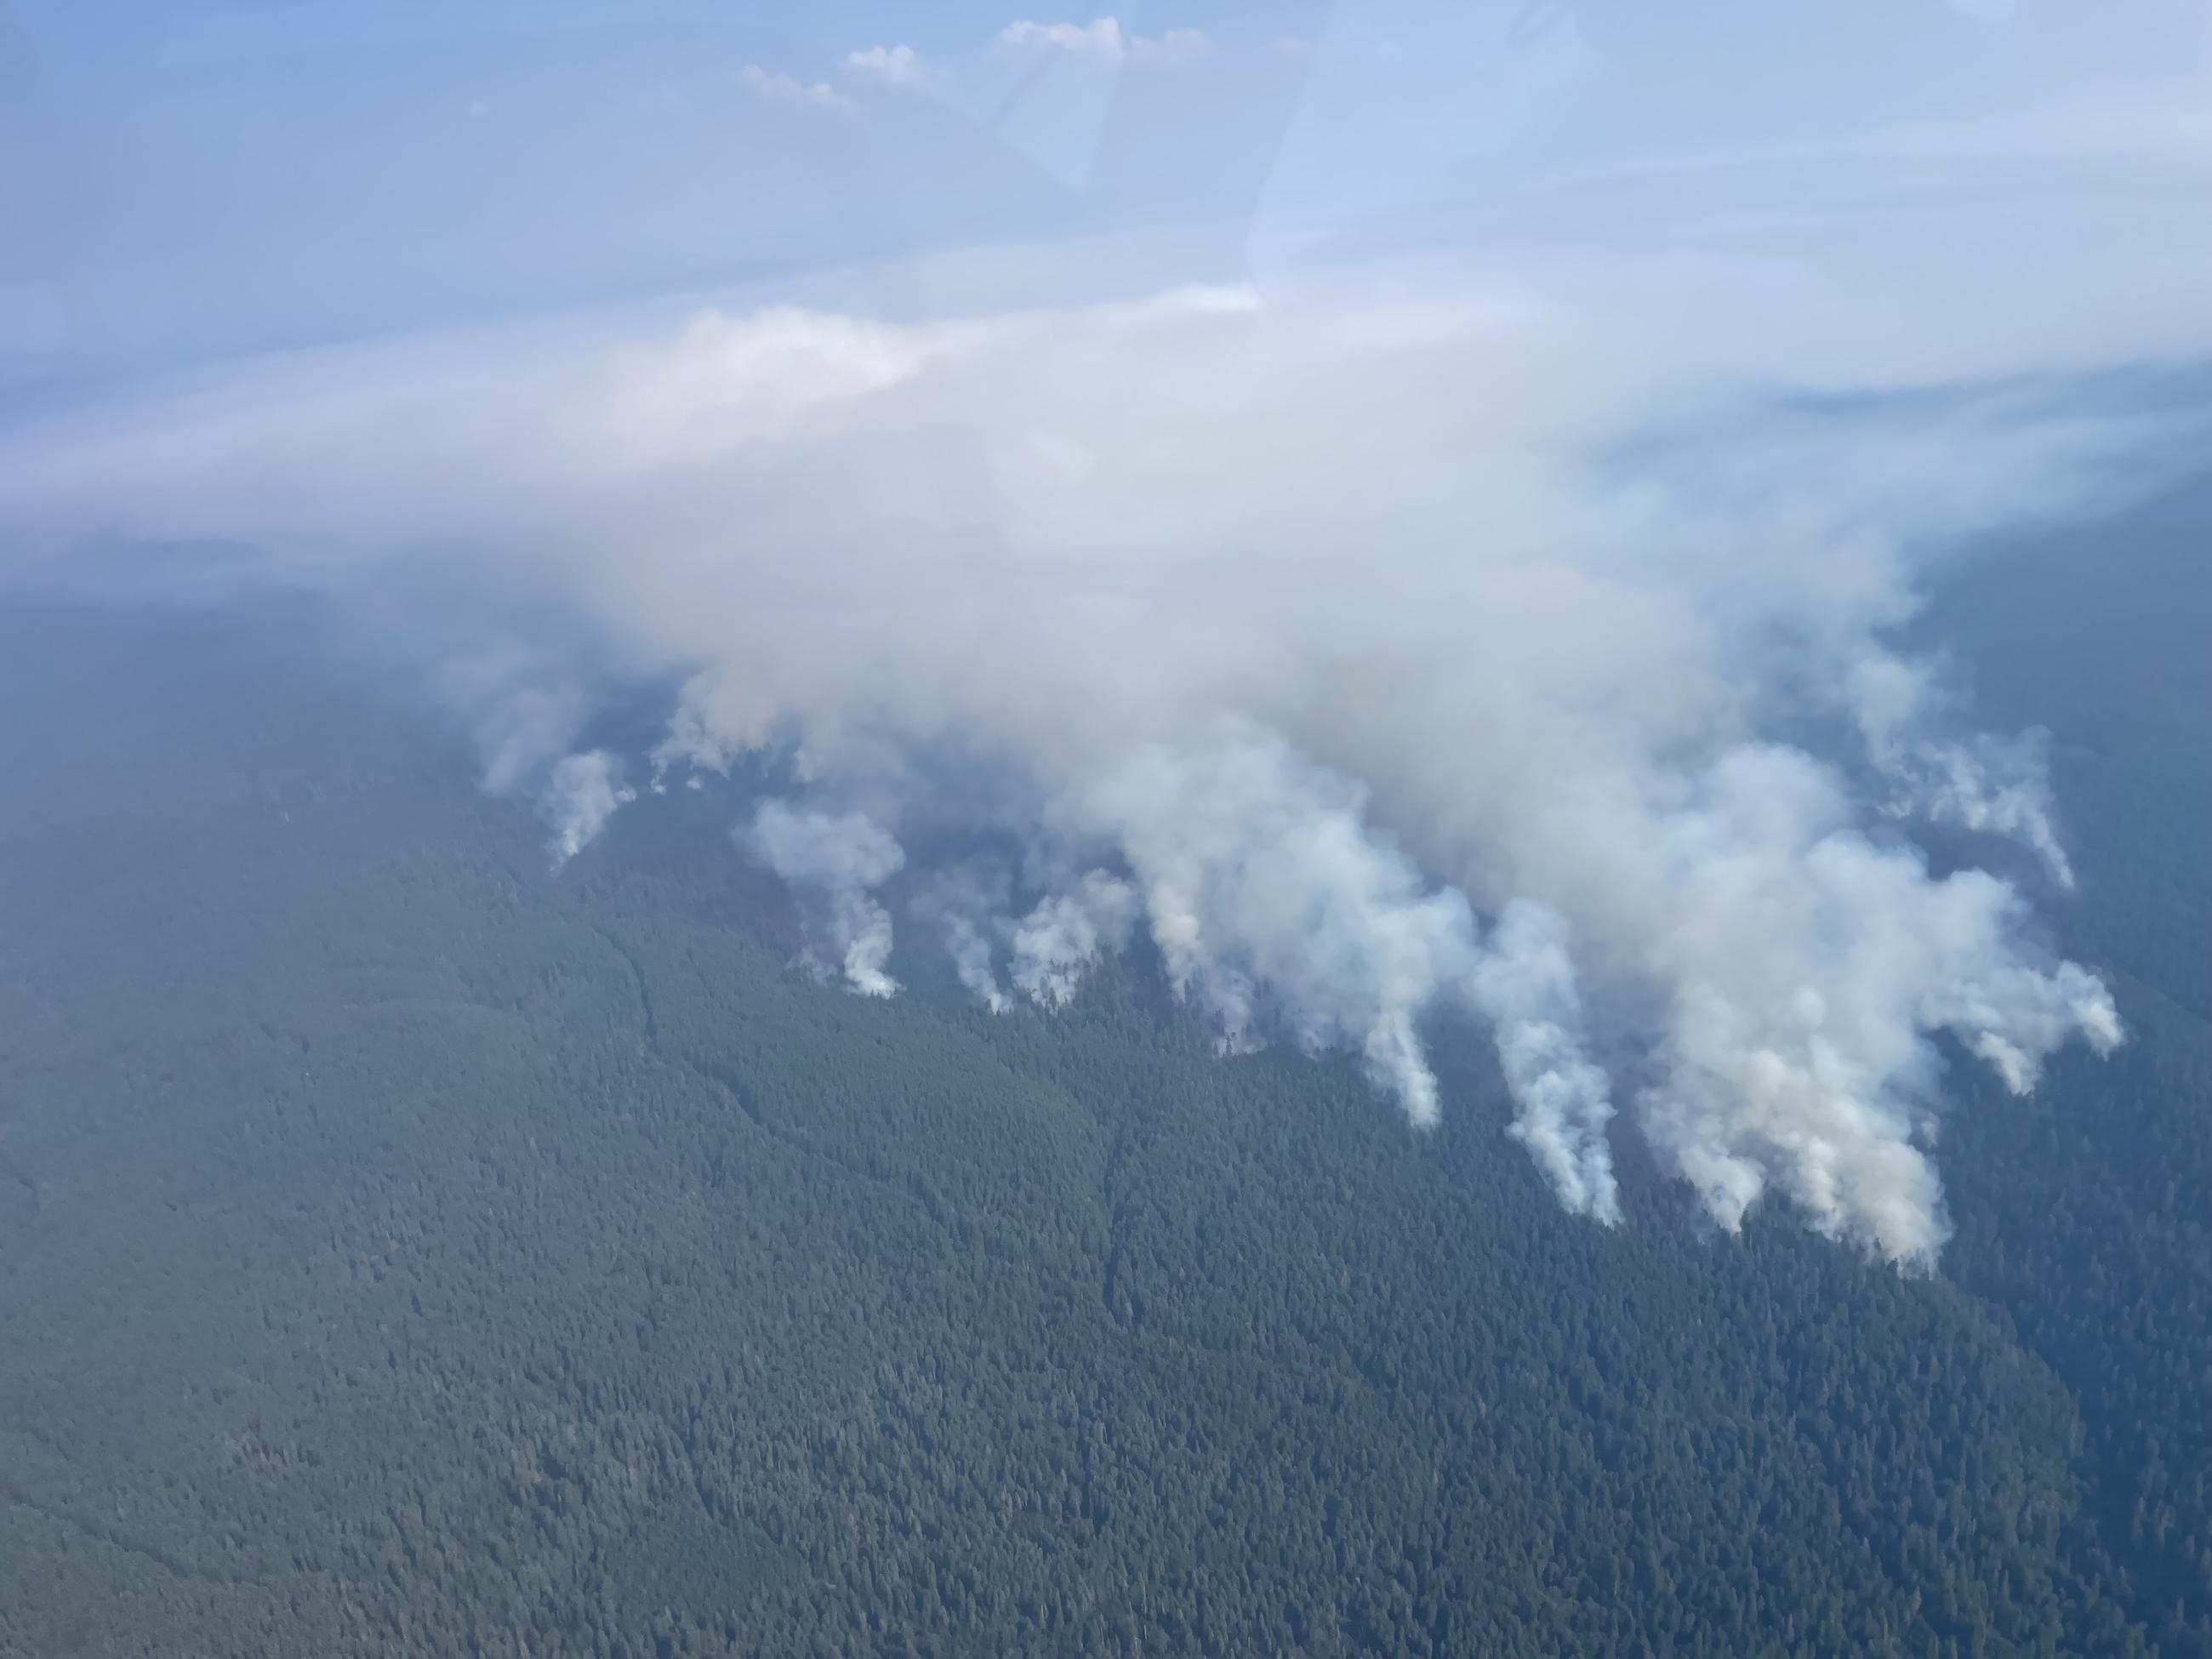 Camp Creek Fire from the air, 8/26